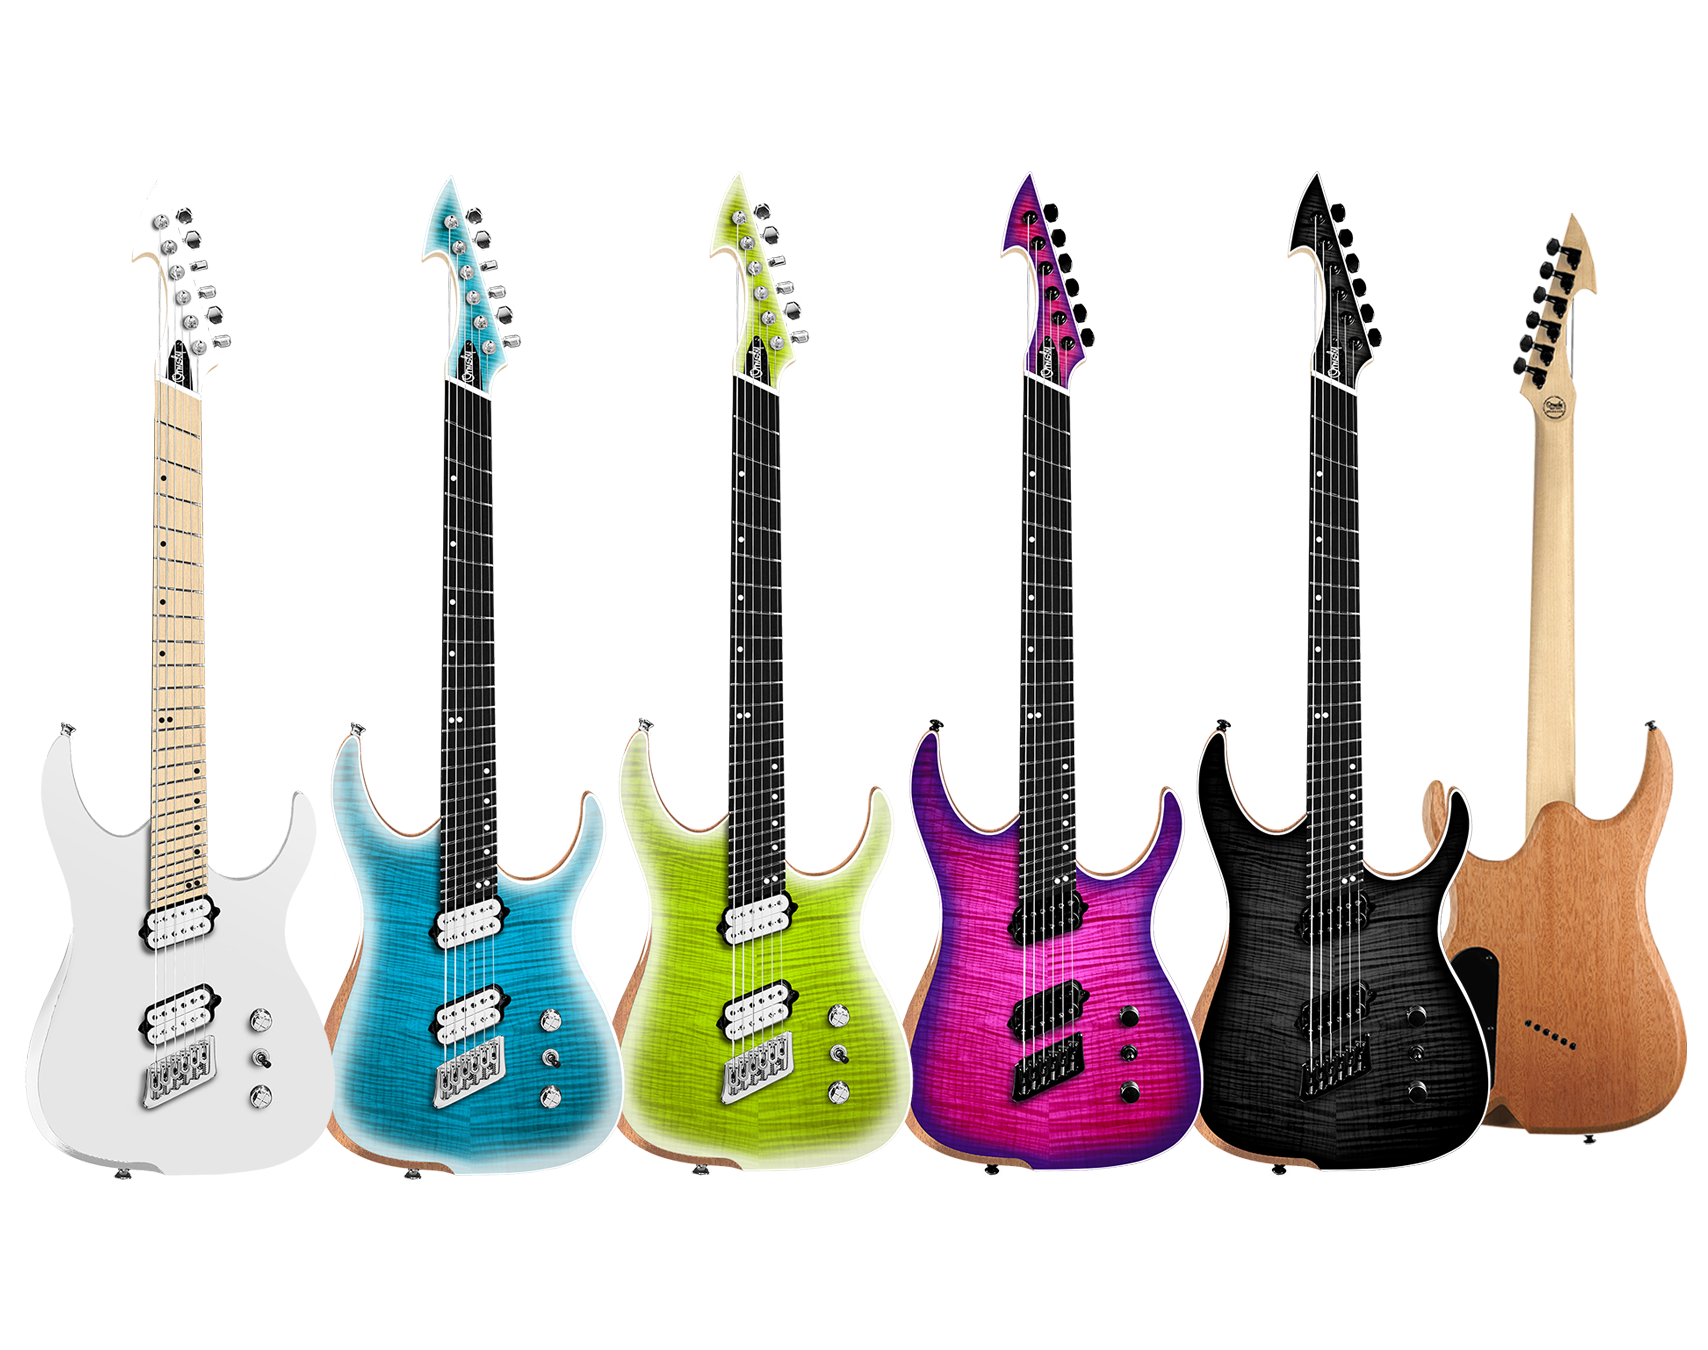 Current Run Pre-Orders - Ormsby Guitars